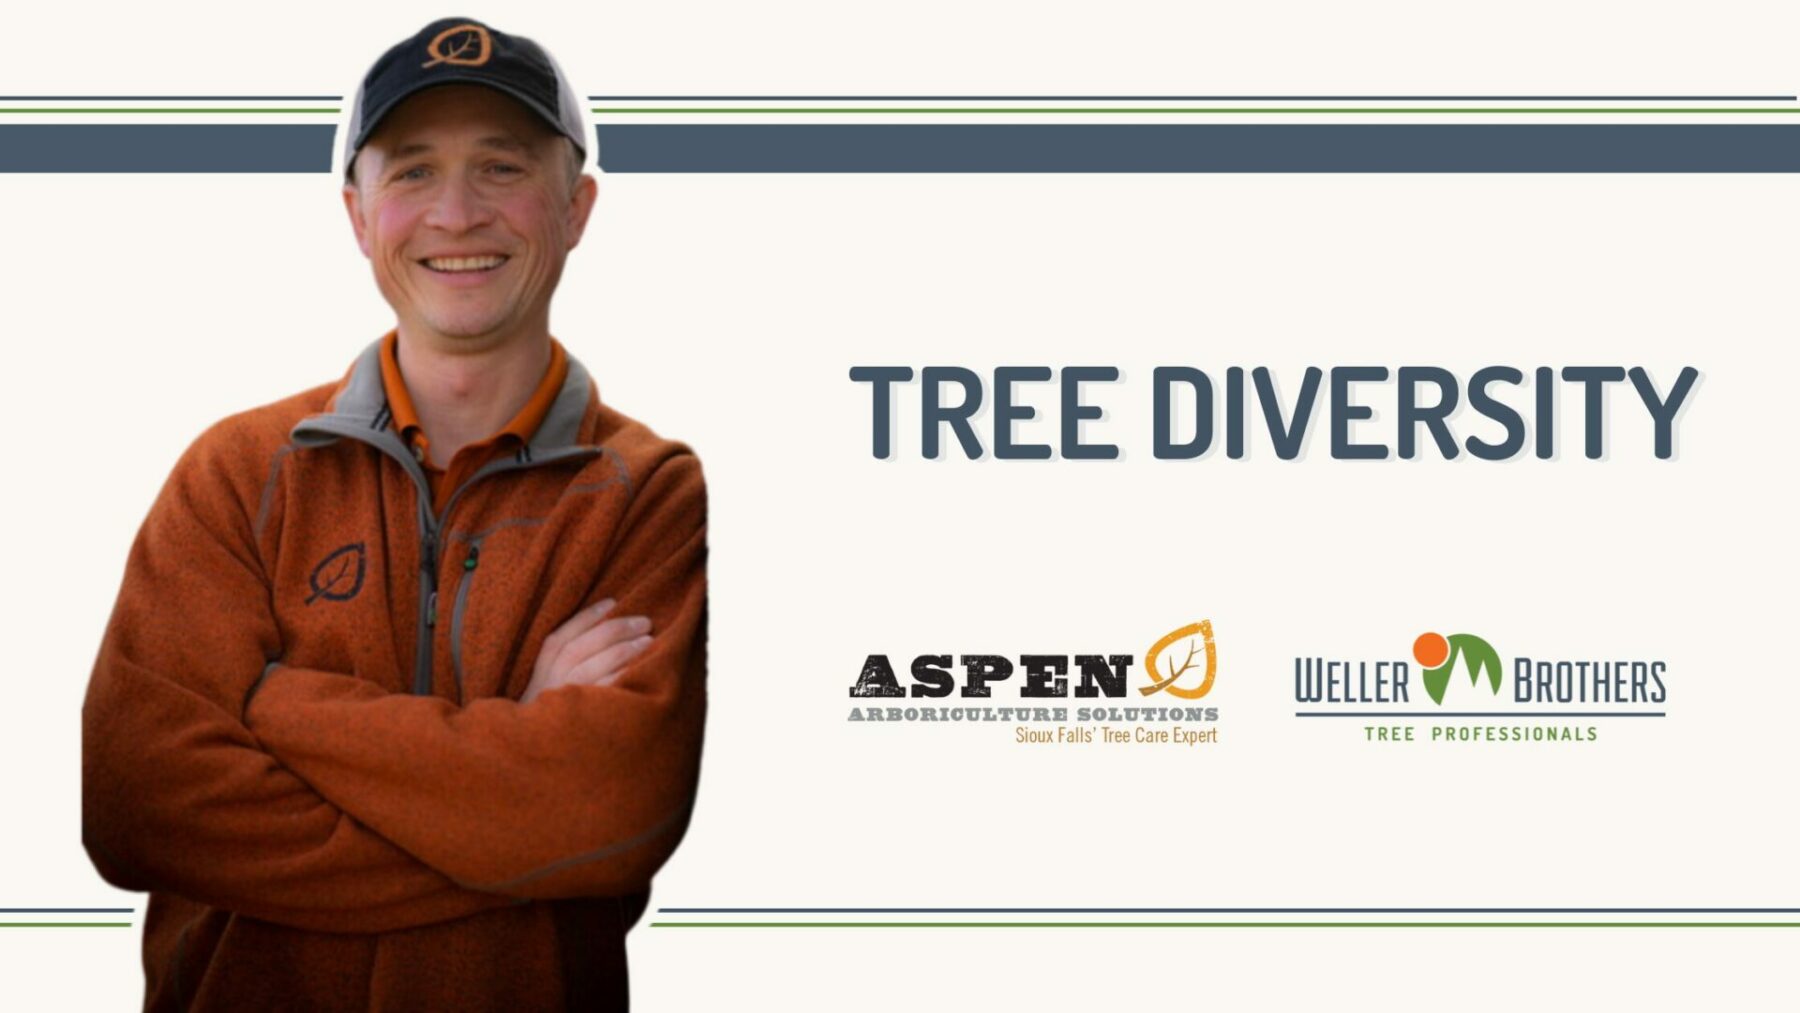 Sam Kezar of Aspen Arboriculture Solutions on a series produced by Weller Brothers - Tree Talk with Sam